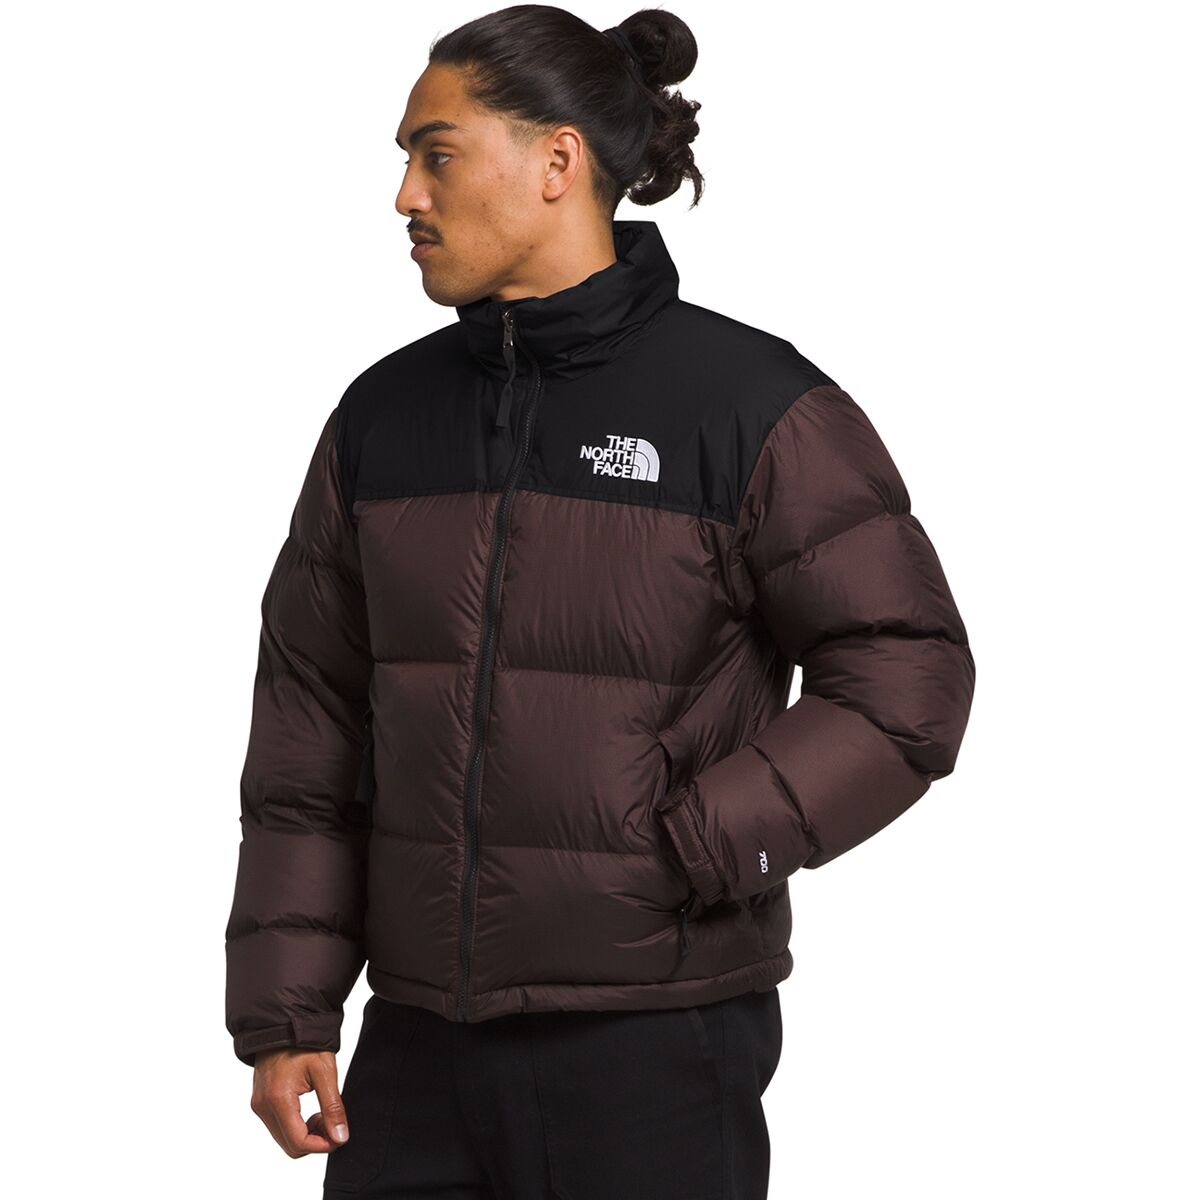 The North Face Men's Down Jackets   Backcountry.com